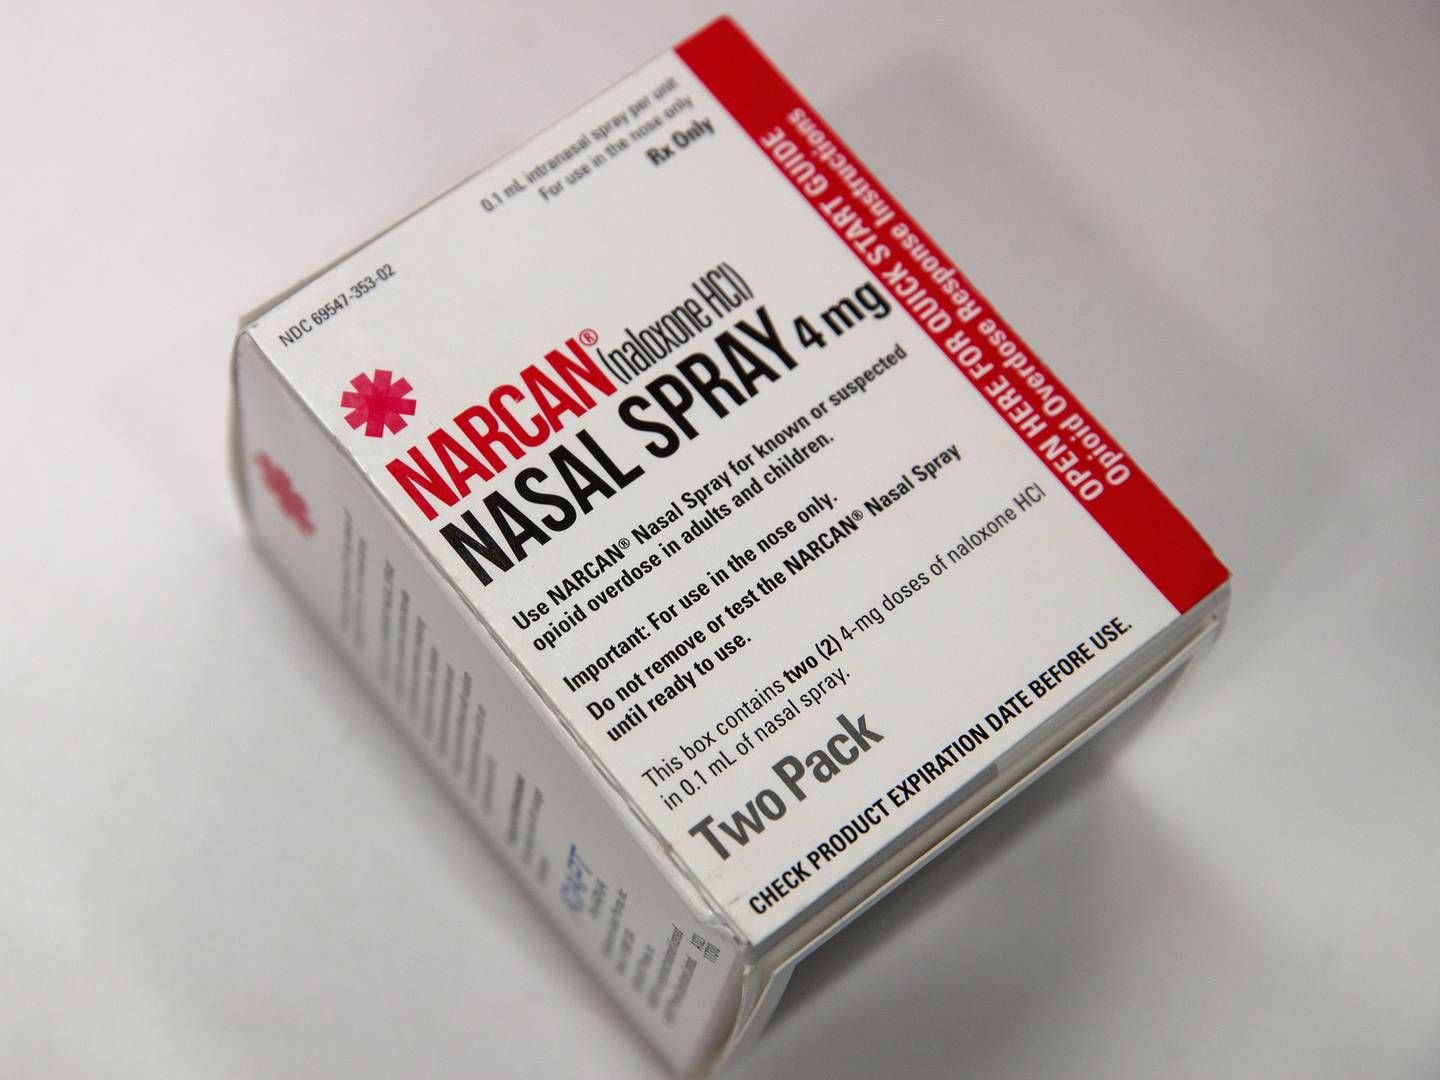 A package of NARCAN (Naloxone) nasal spray sits on the counter at a Walgreens pharmacy, August 9, 2017 in New York City.